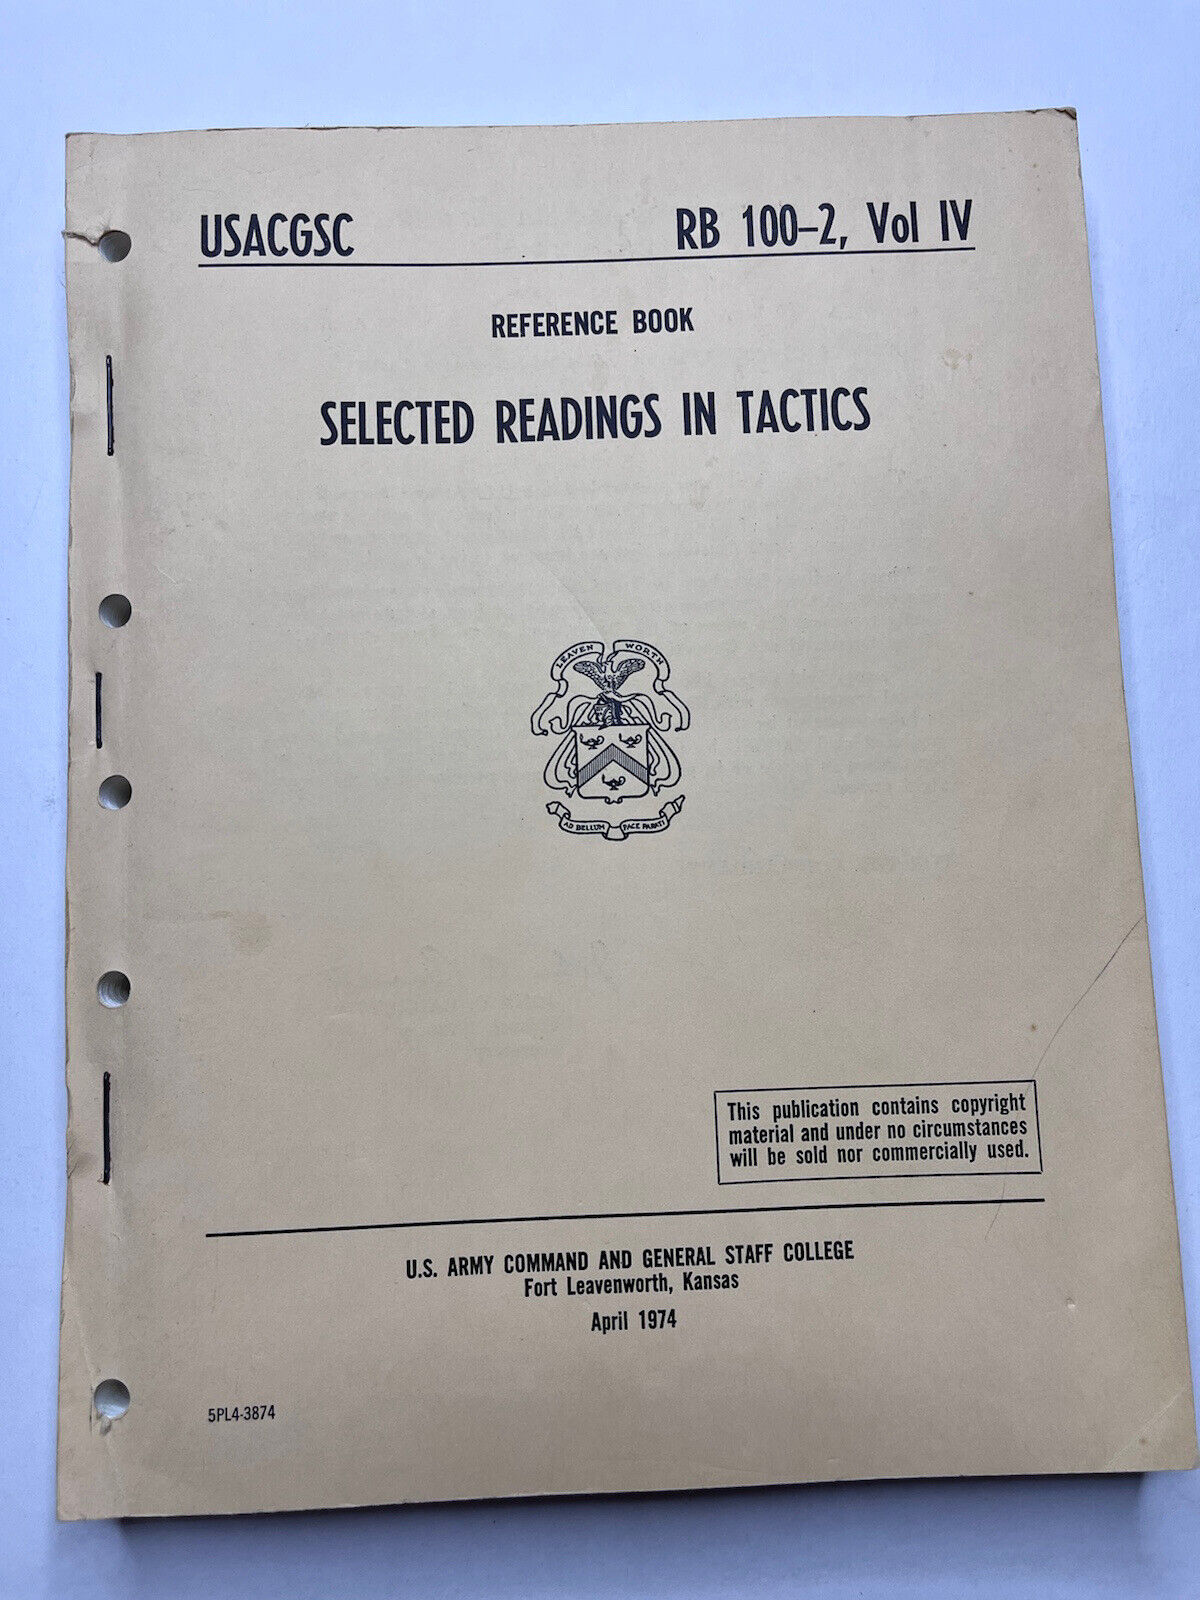 USACGSC Selected Readings in Tactics Reference Book RB100-2 Vol IV